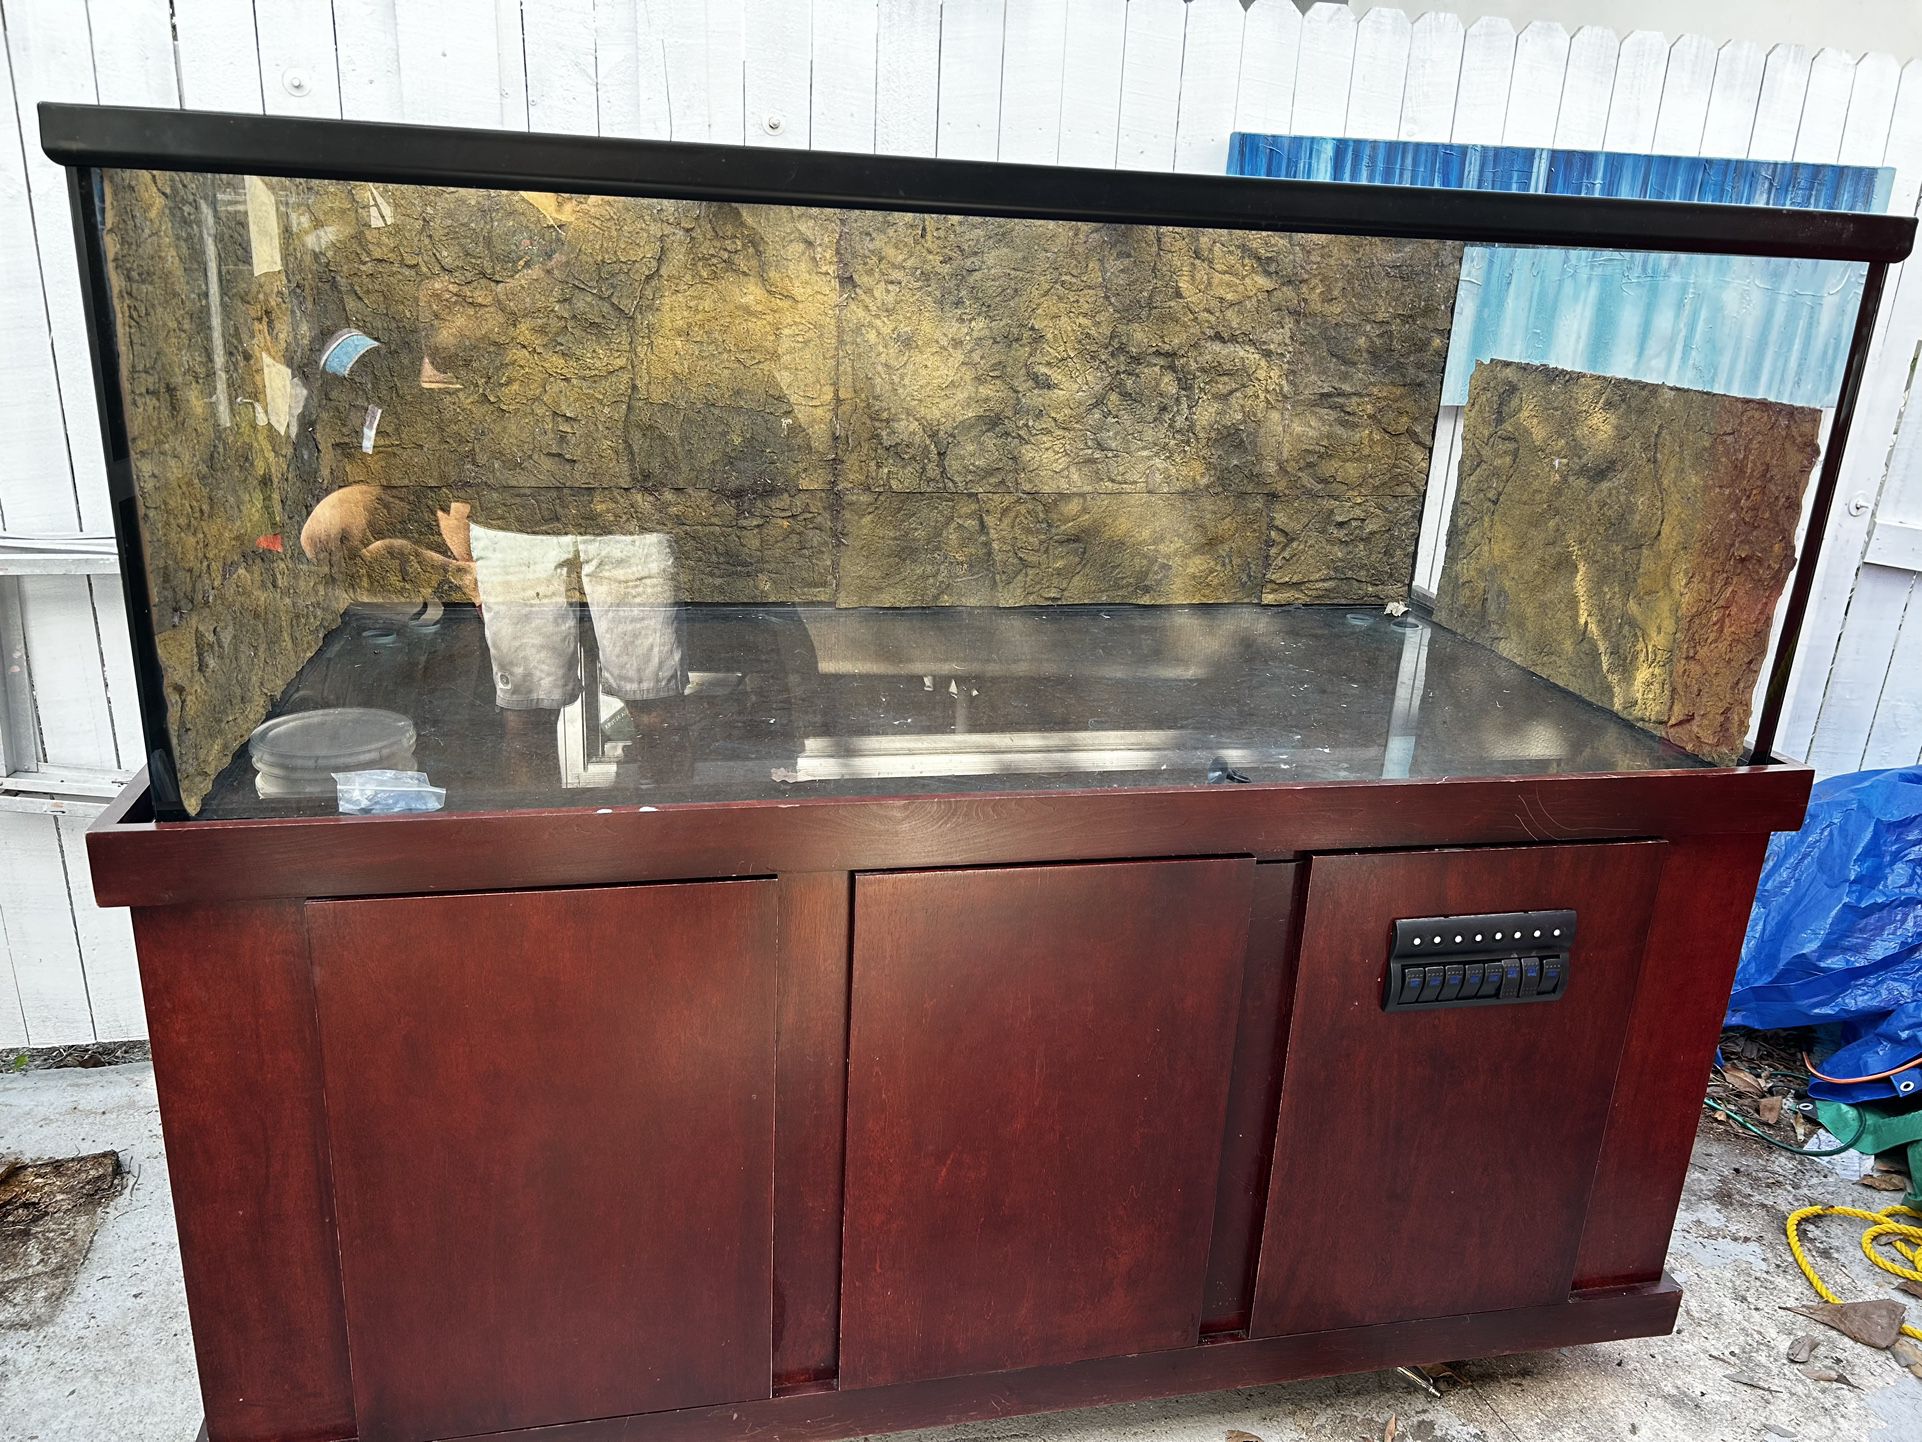 300 Gallon Fish Tank With Stand